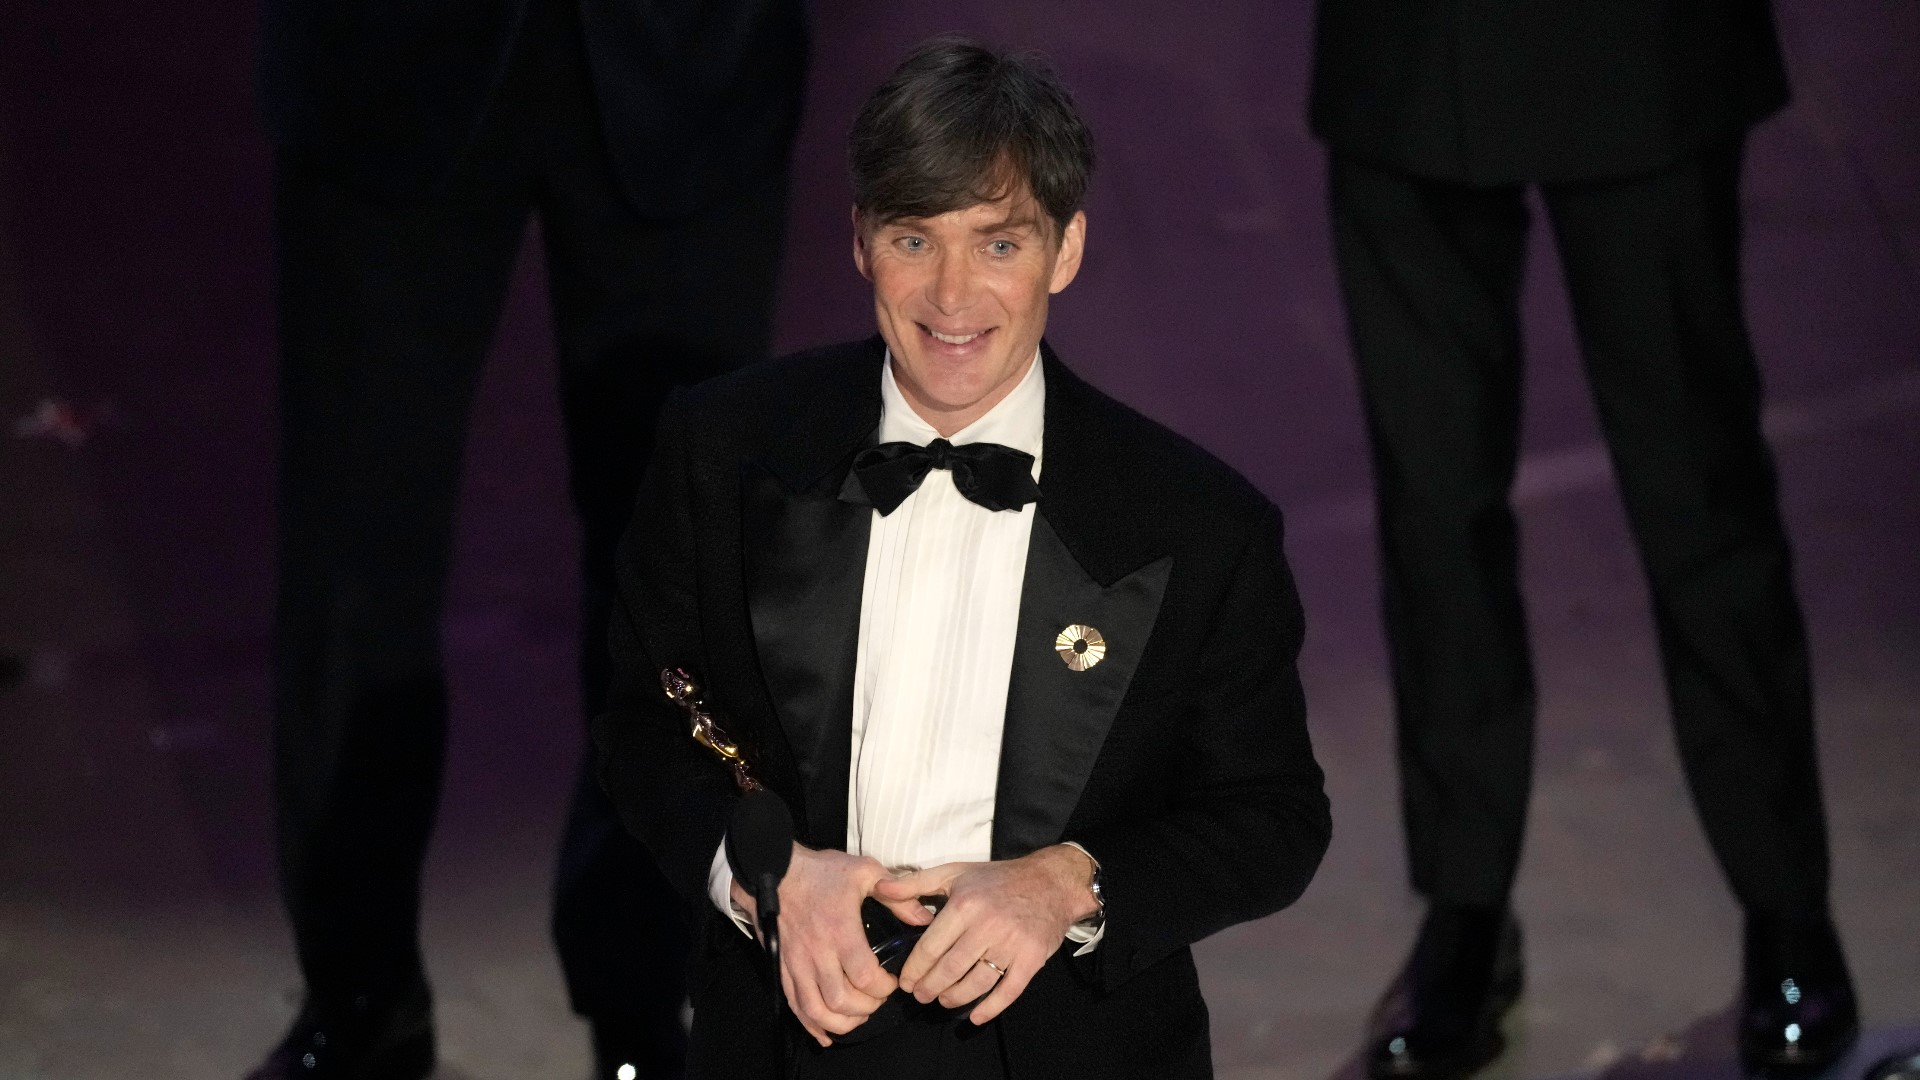 Cillian Murphy wins his first Oscar for role in Oppenheimer